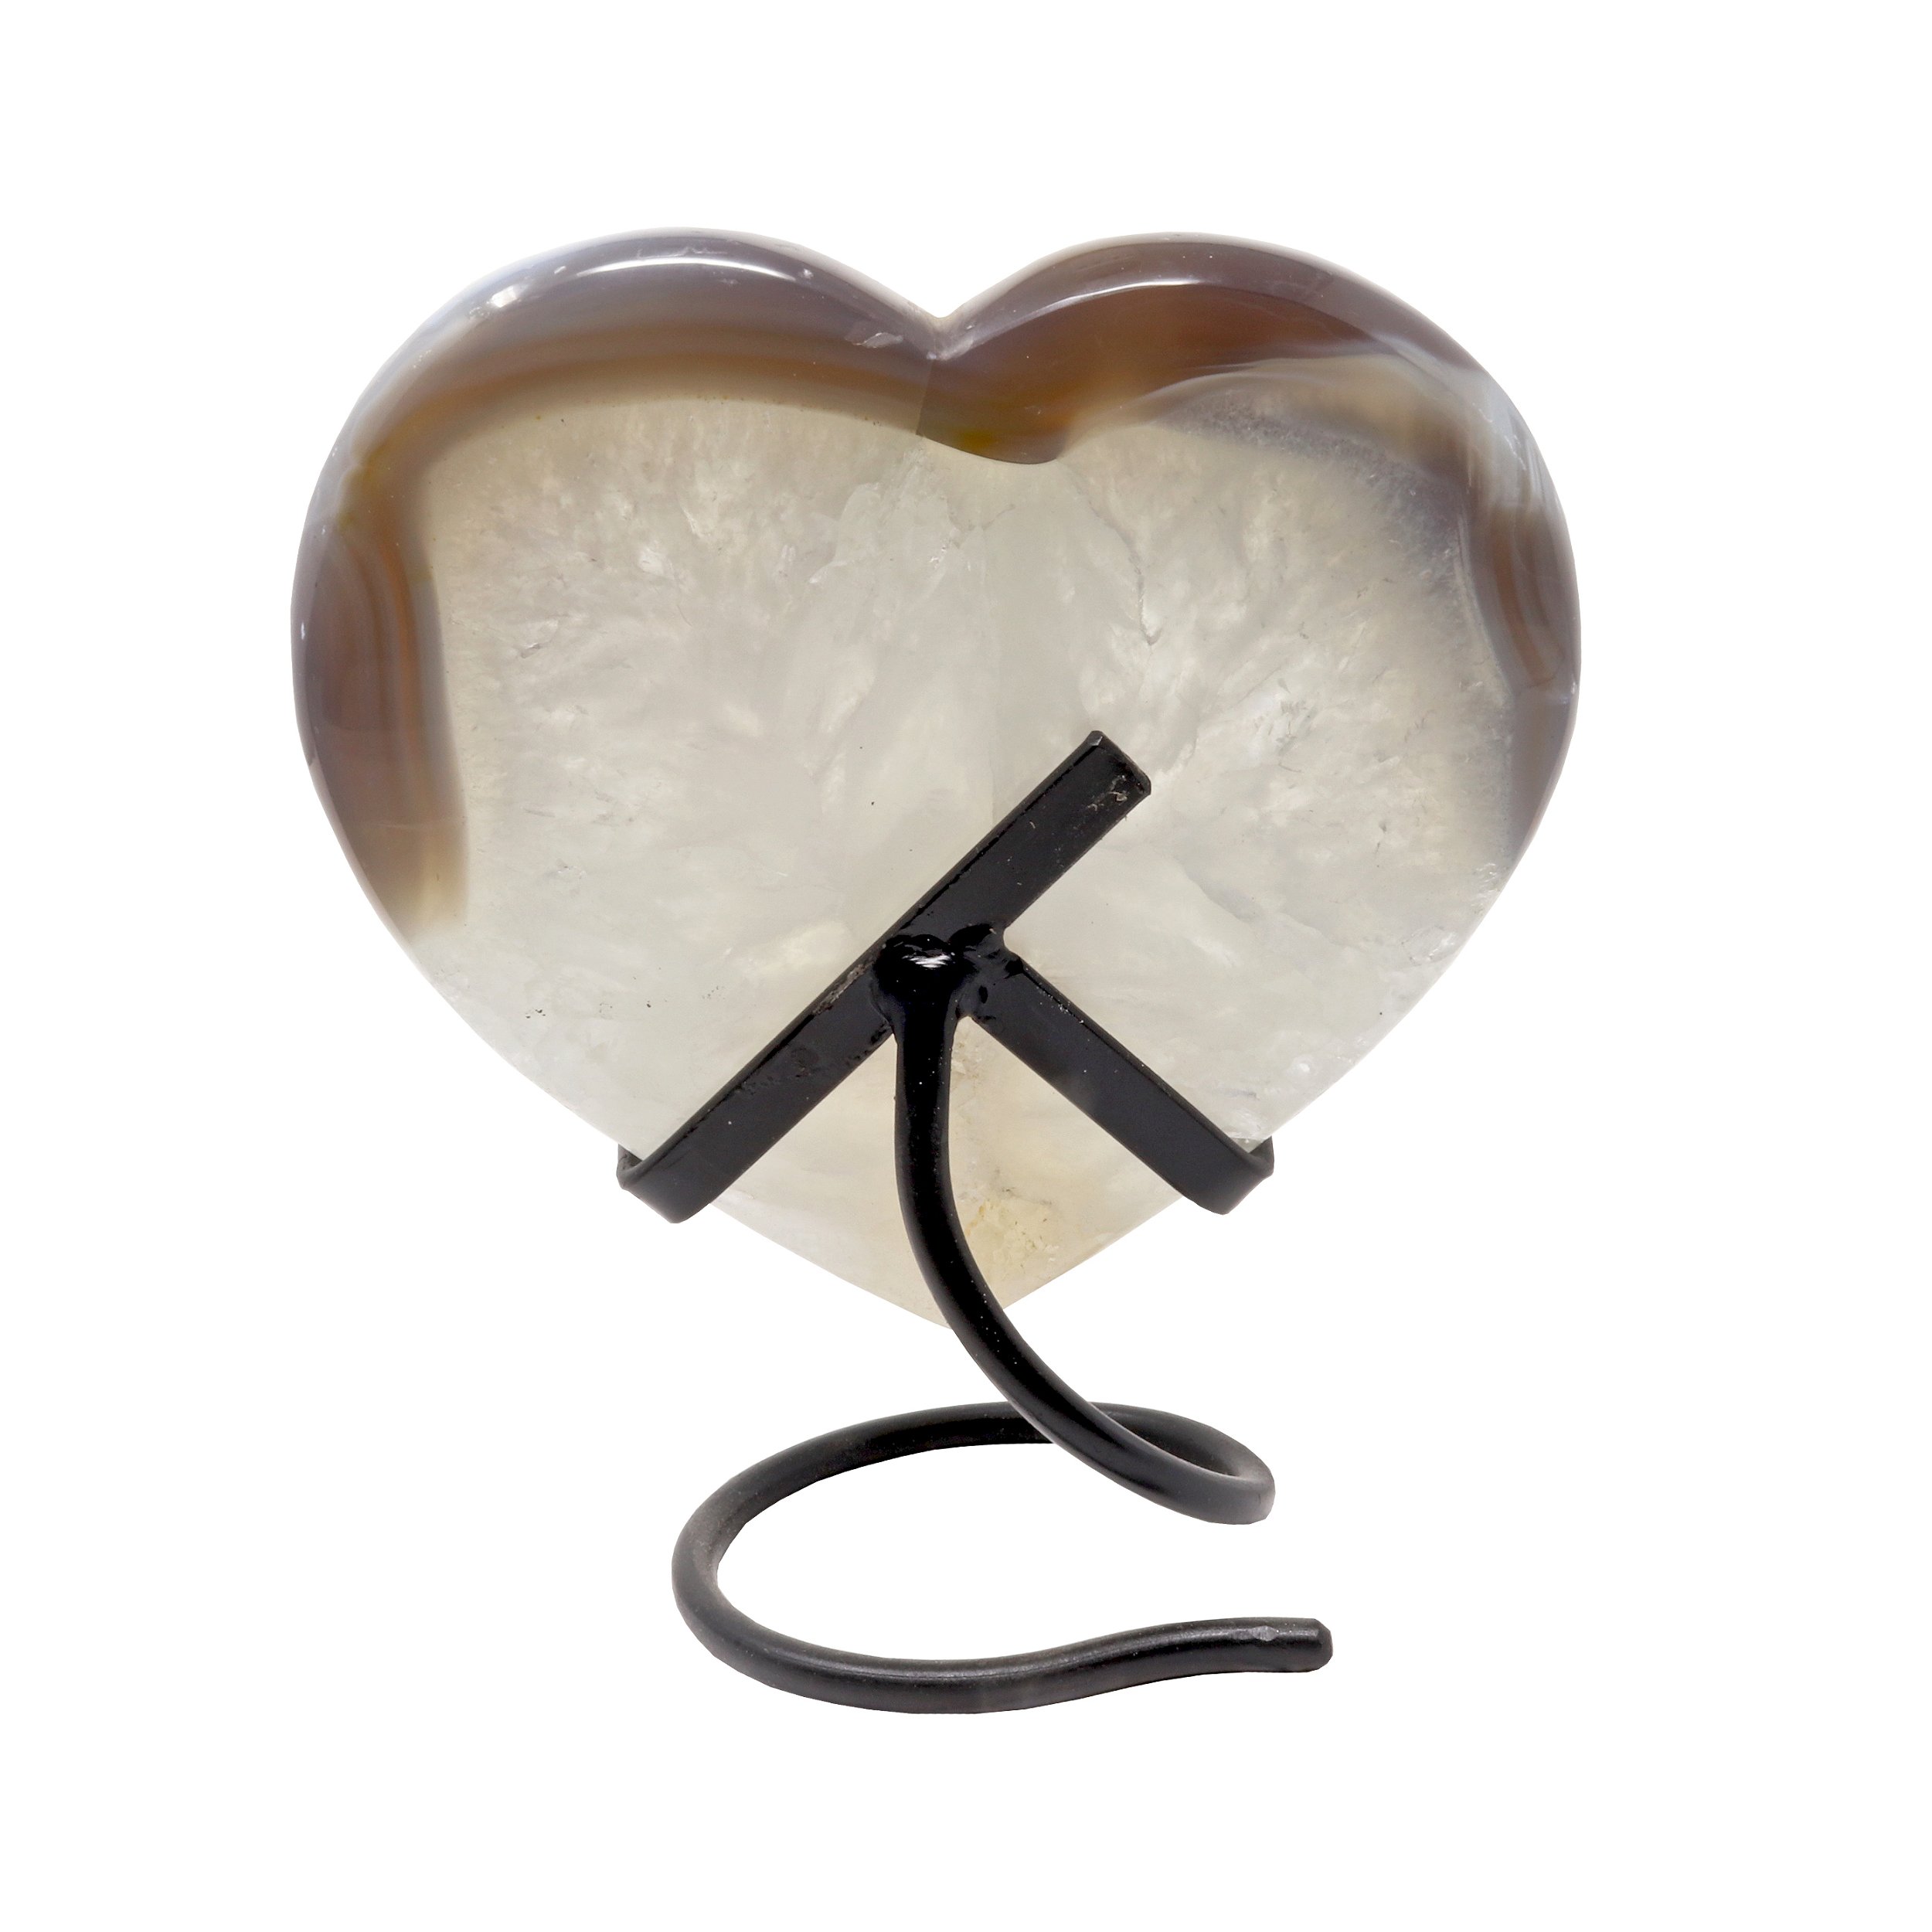 Agate Quartz Heart On A Spiral Fitted Stand